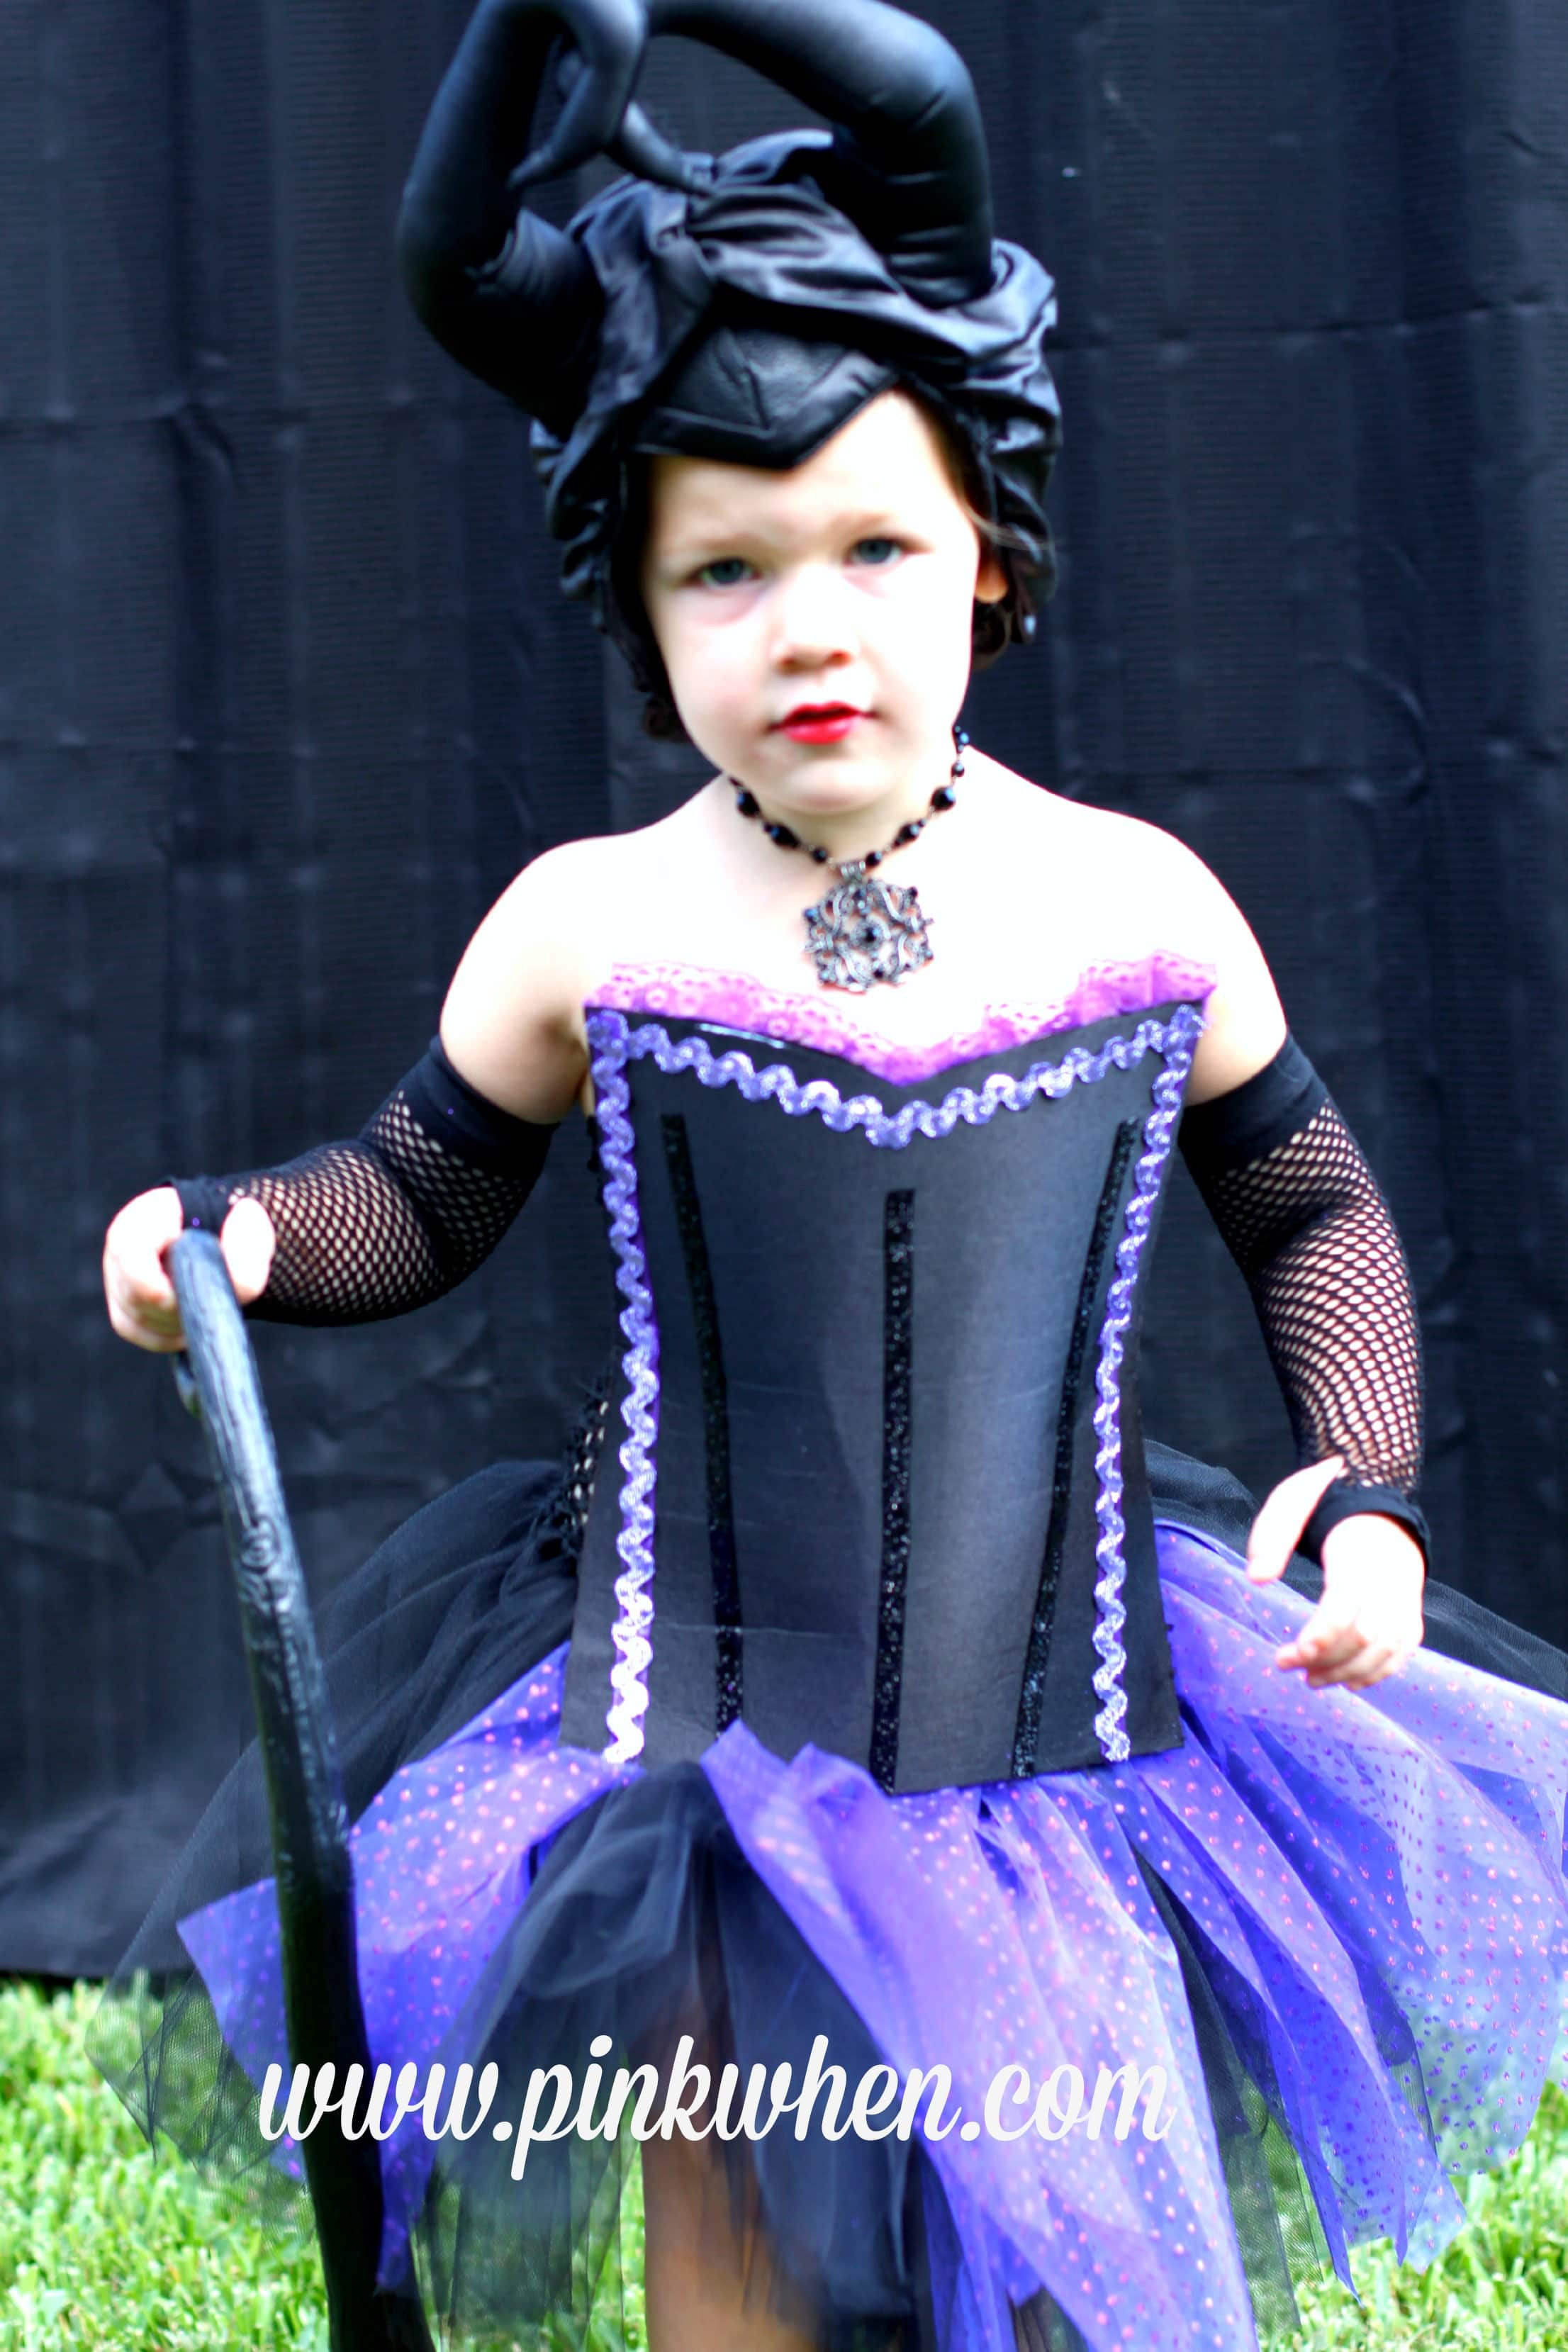 DIY Maleficent Costume
 DIY No Sew Maleficent Costume Page 2 of 2